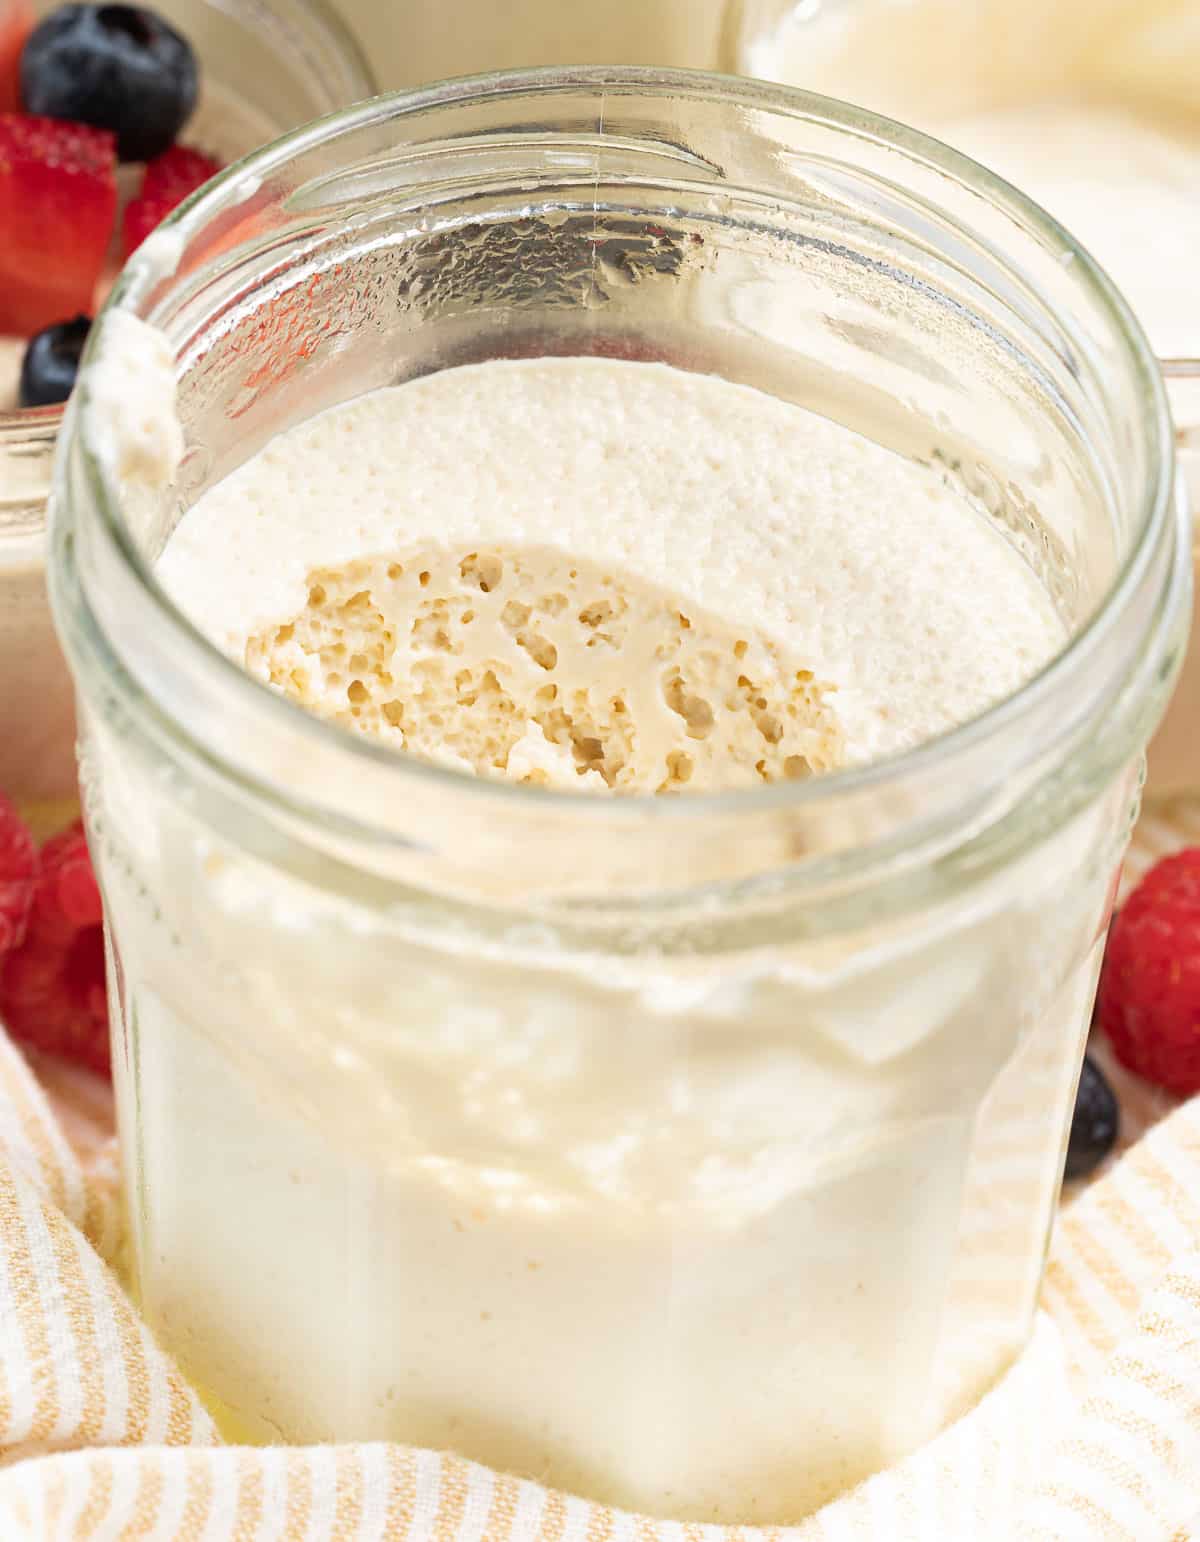 thick vegan yogurt in a jar with a spoon removed showing the bubbly fermented texture